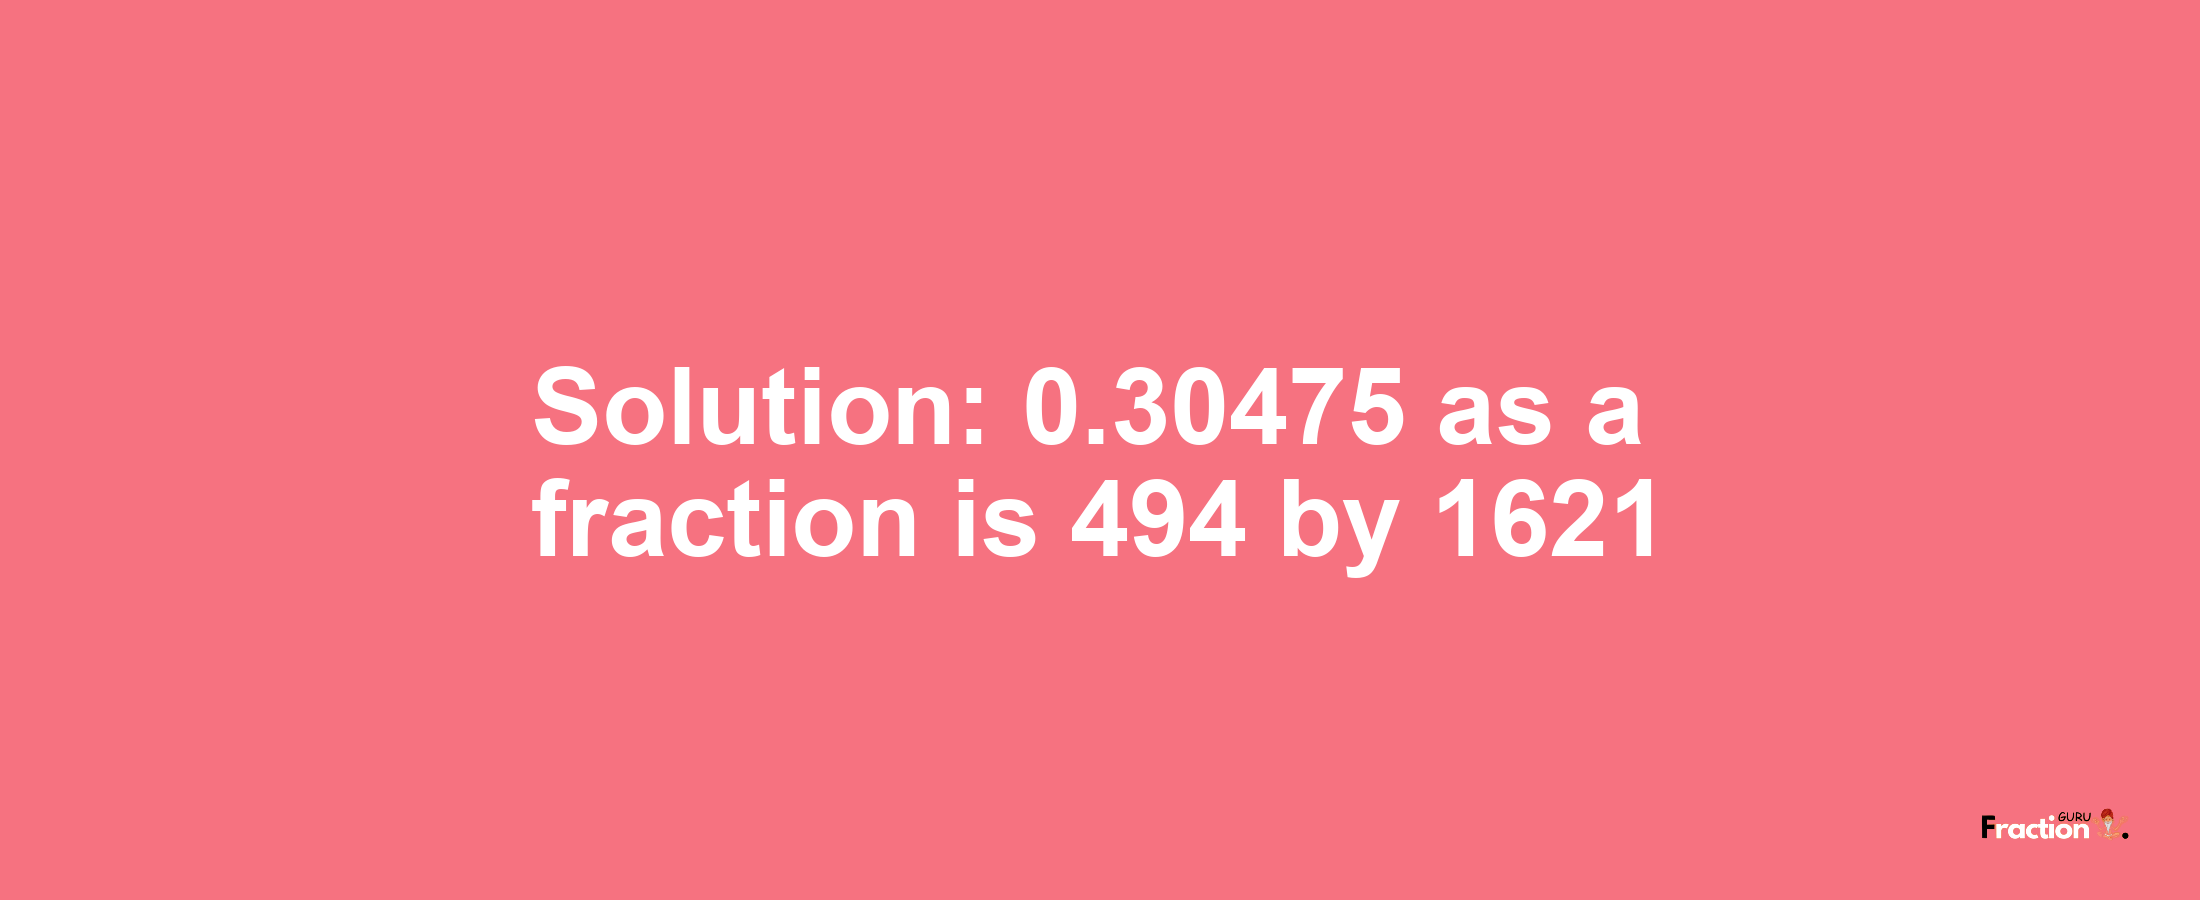 Solution:0.30475 as a fraction is 494/1621